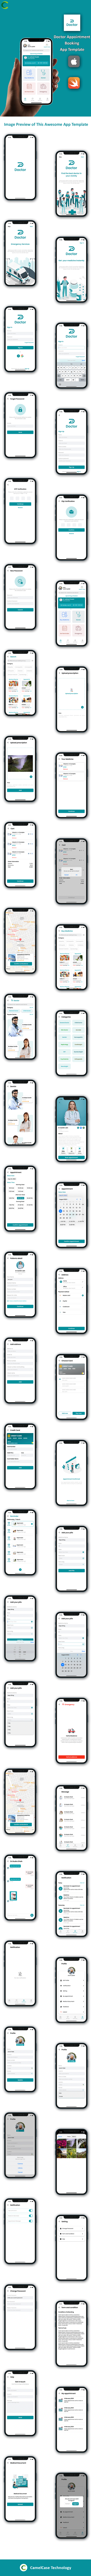 Doctor Appointment Booking App Template in iOS Swift | DoctorPlus - 4